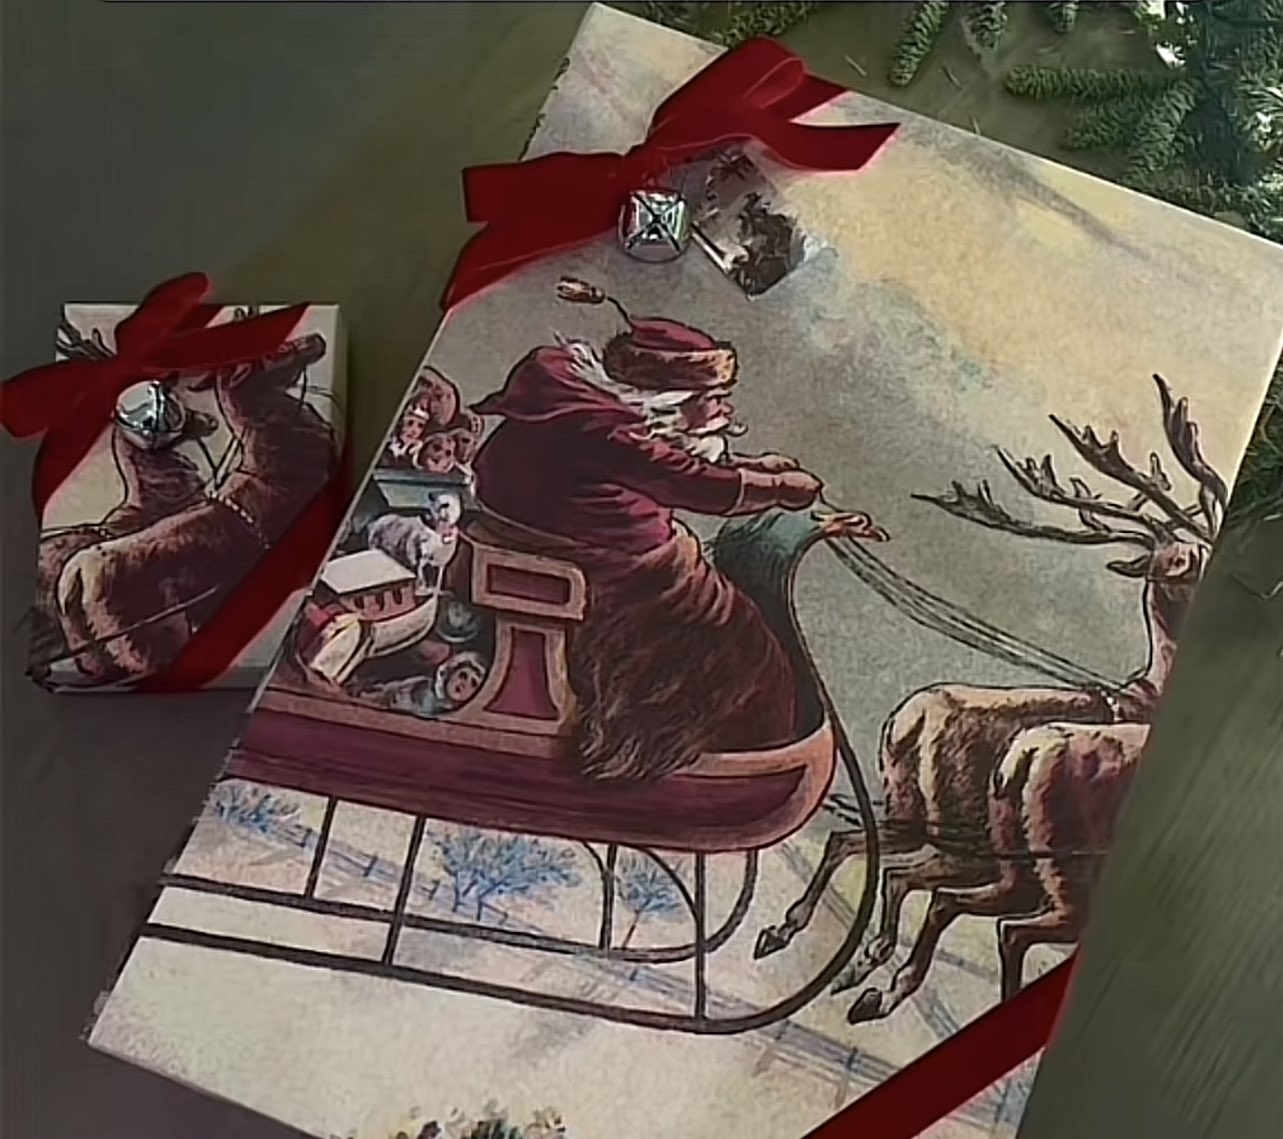 Wrapping paper showing Santa on his sled with reindeers in front